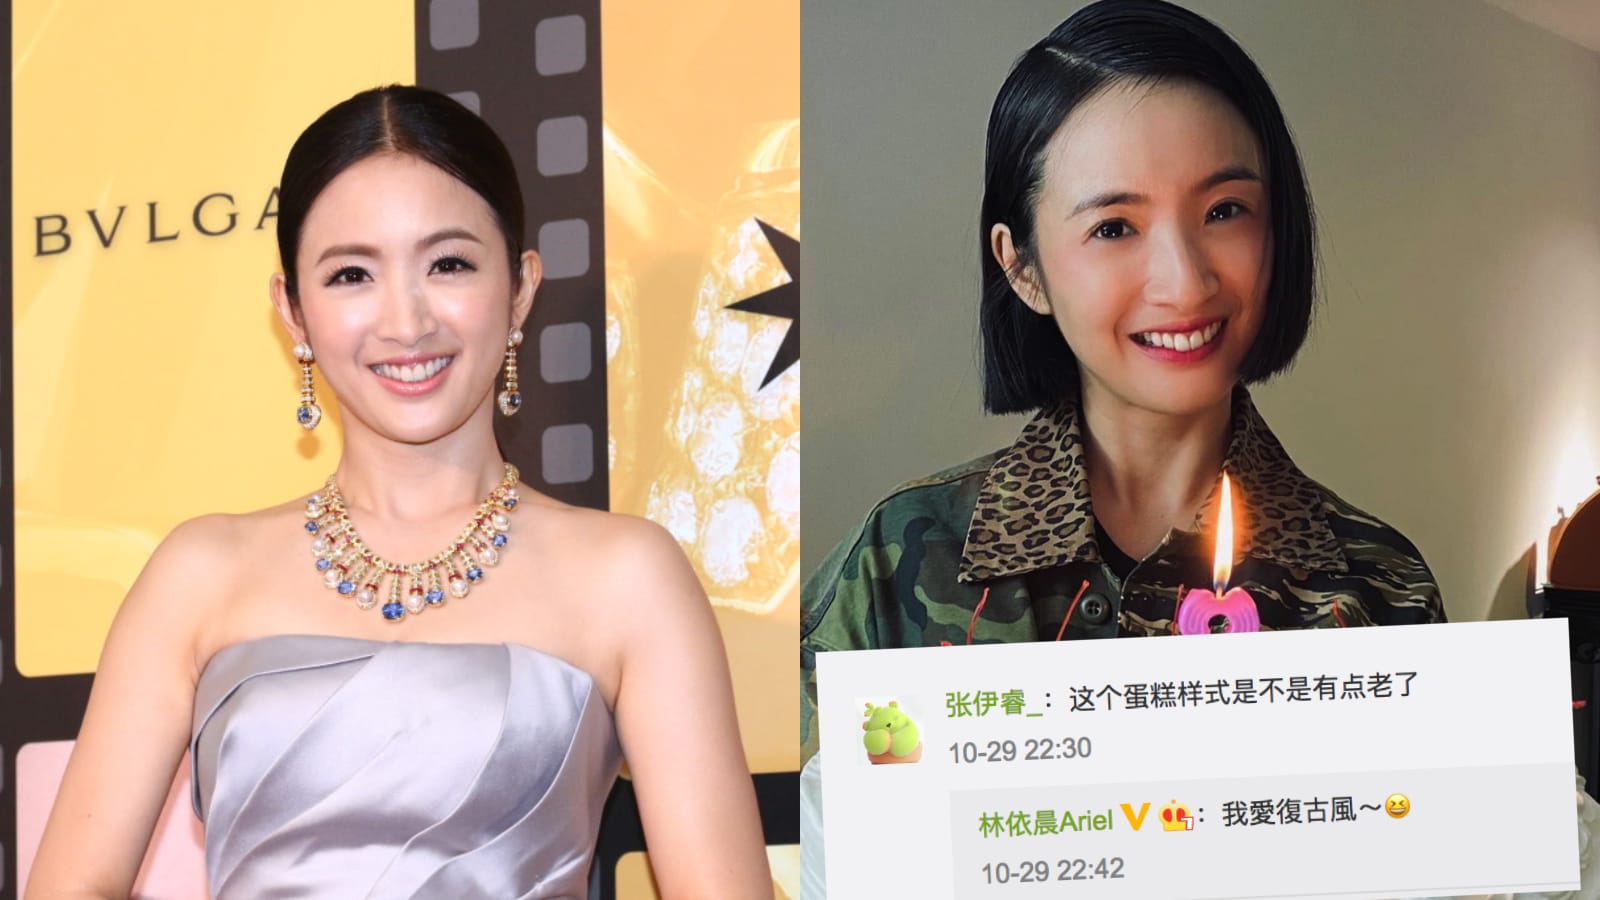 Ariel Lin Had The Best Responses To Those Who Mocked Her Birthday Cake For Being “Old-Fashioned”